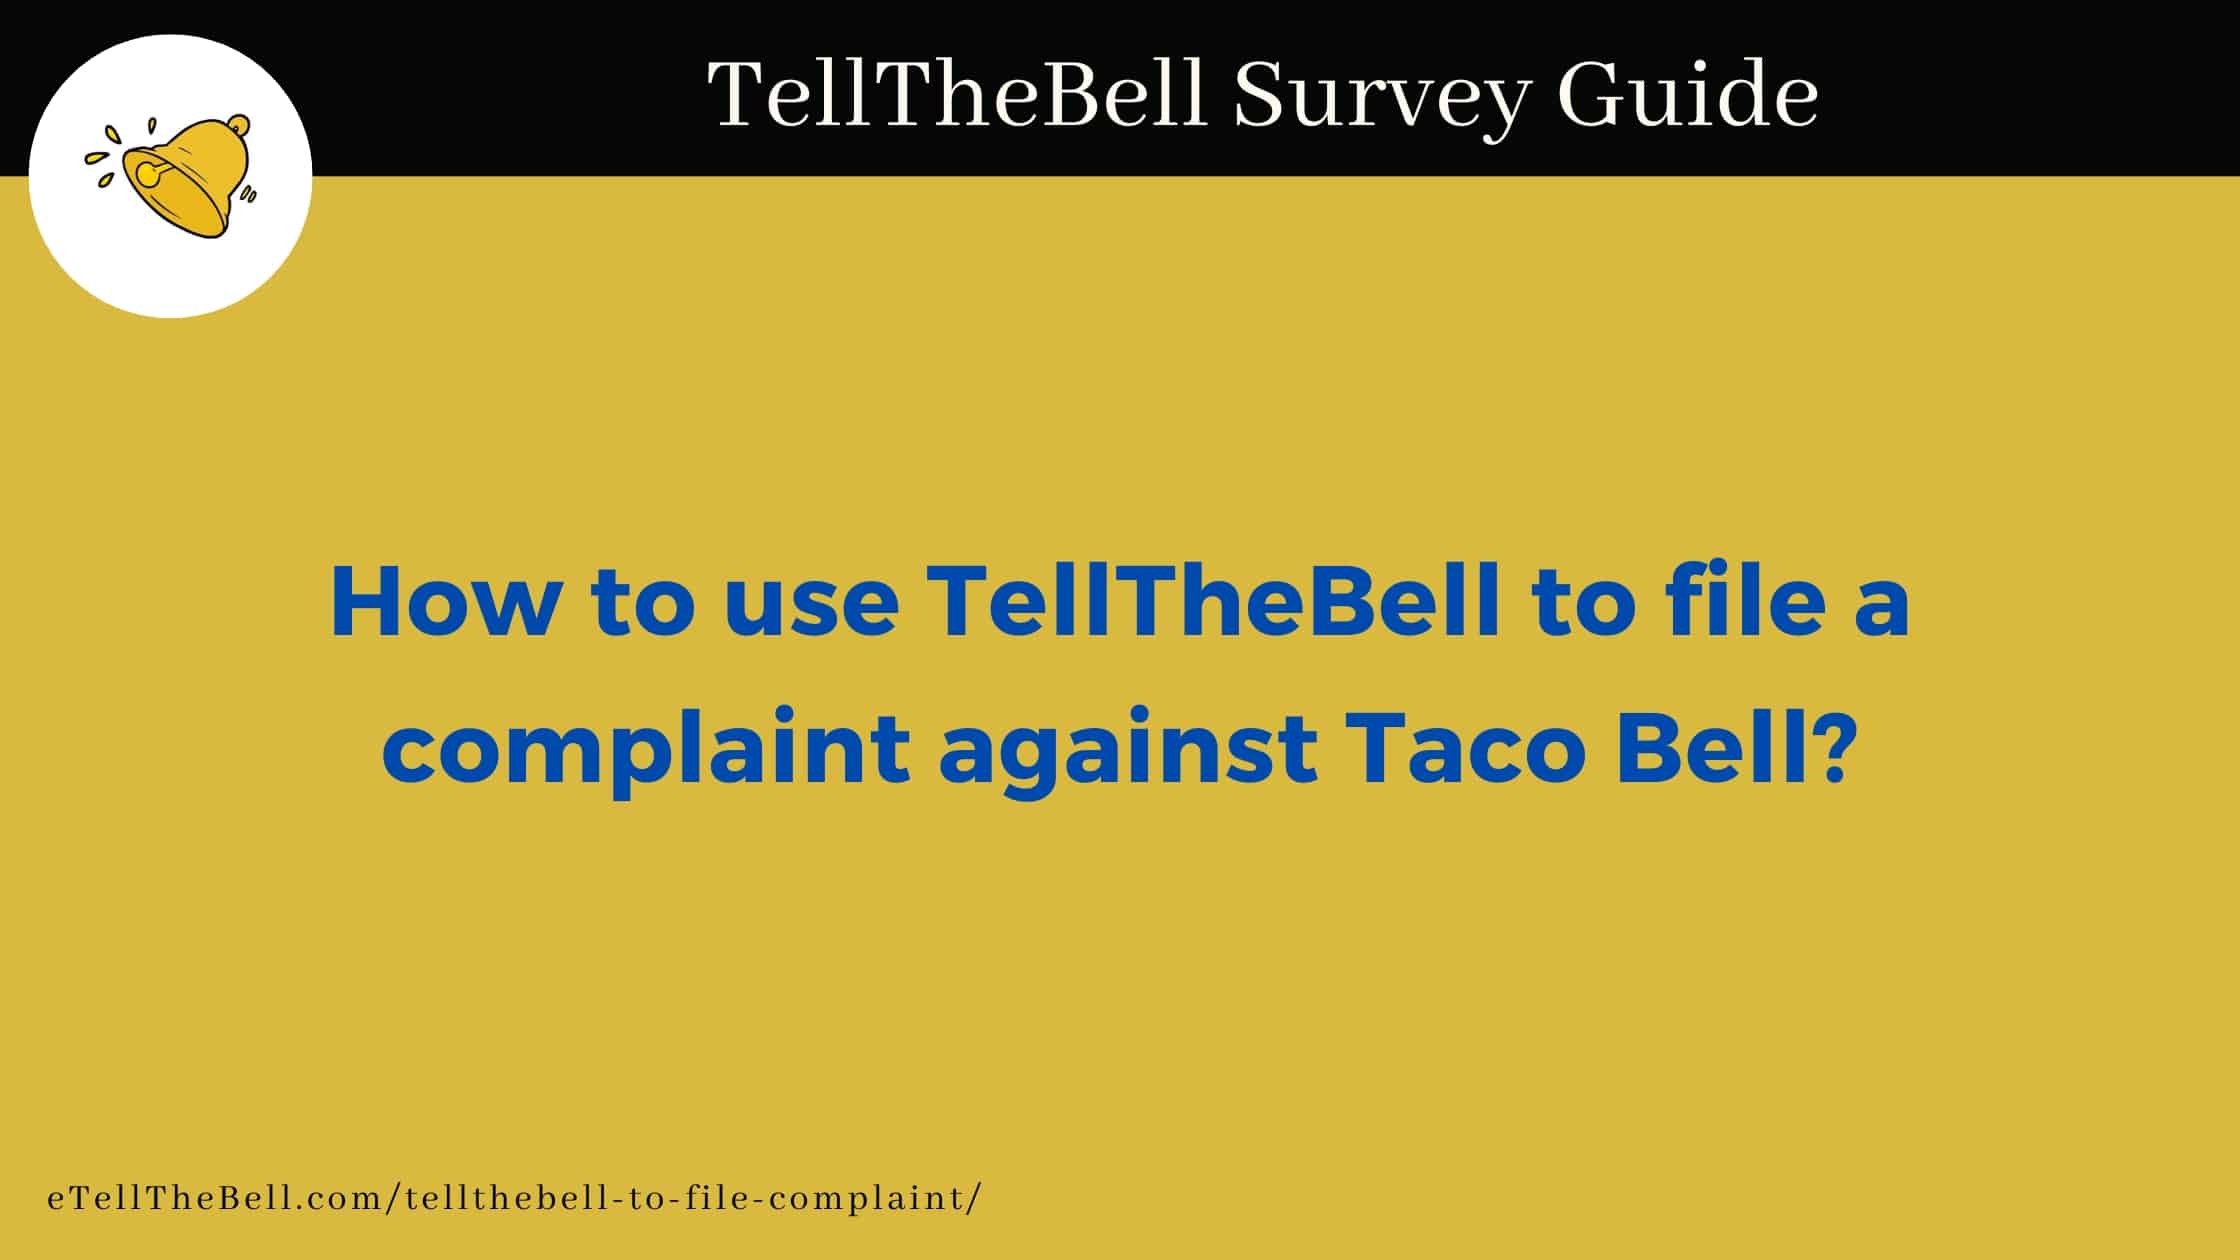 How to use TellTheBell to file a complaint against Taco Bell